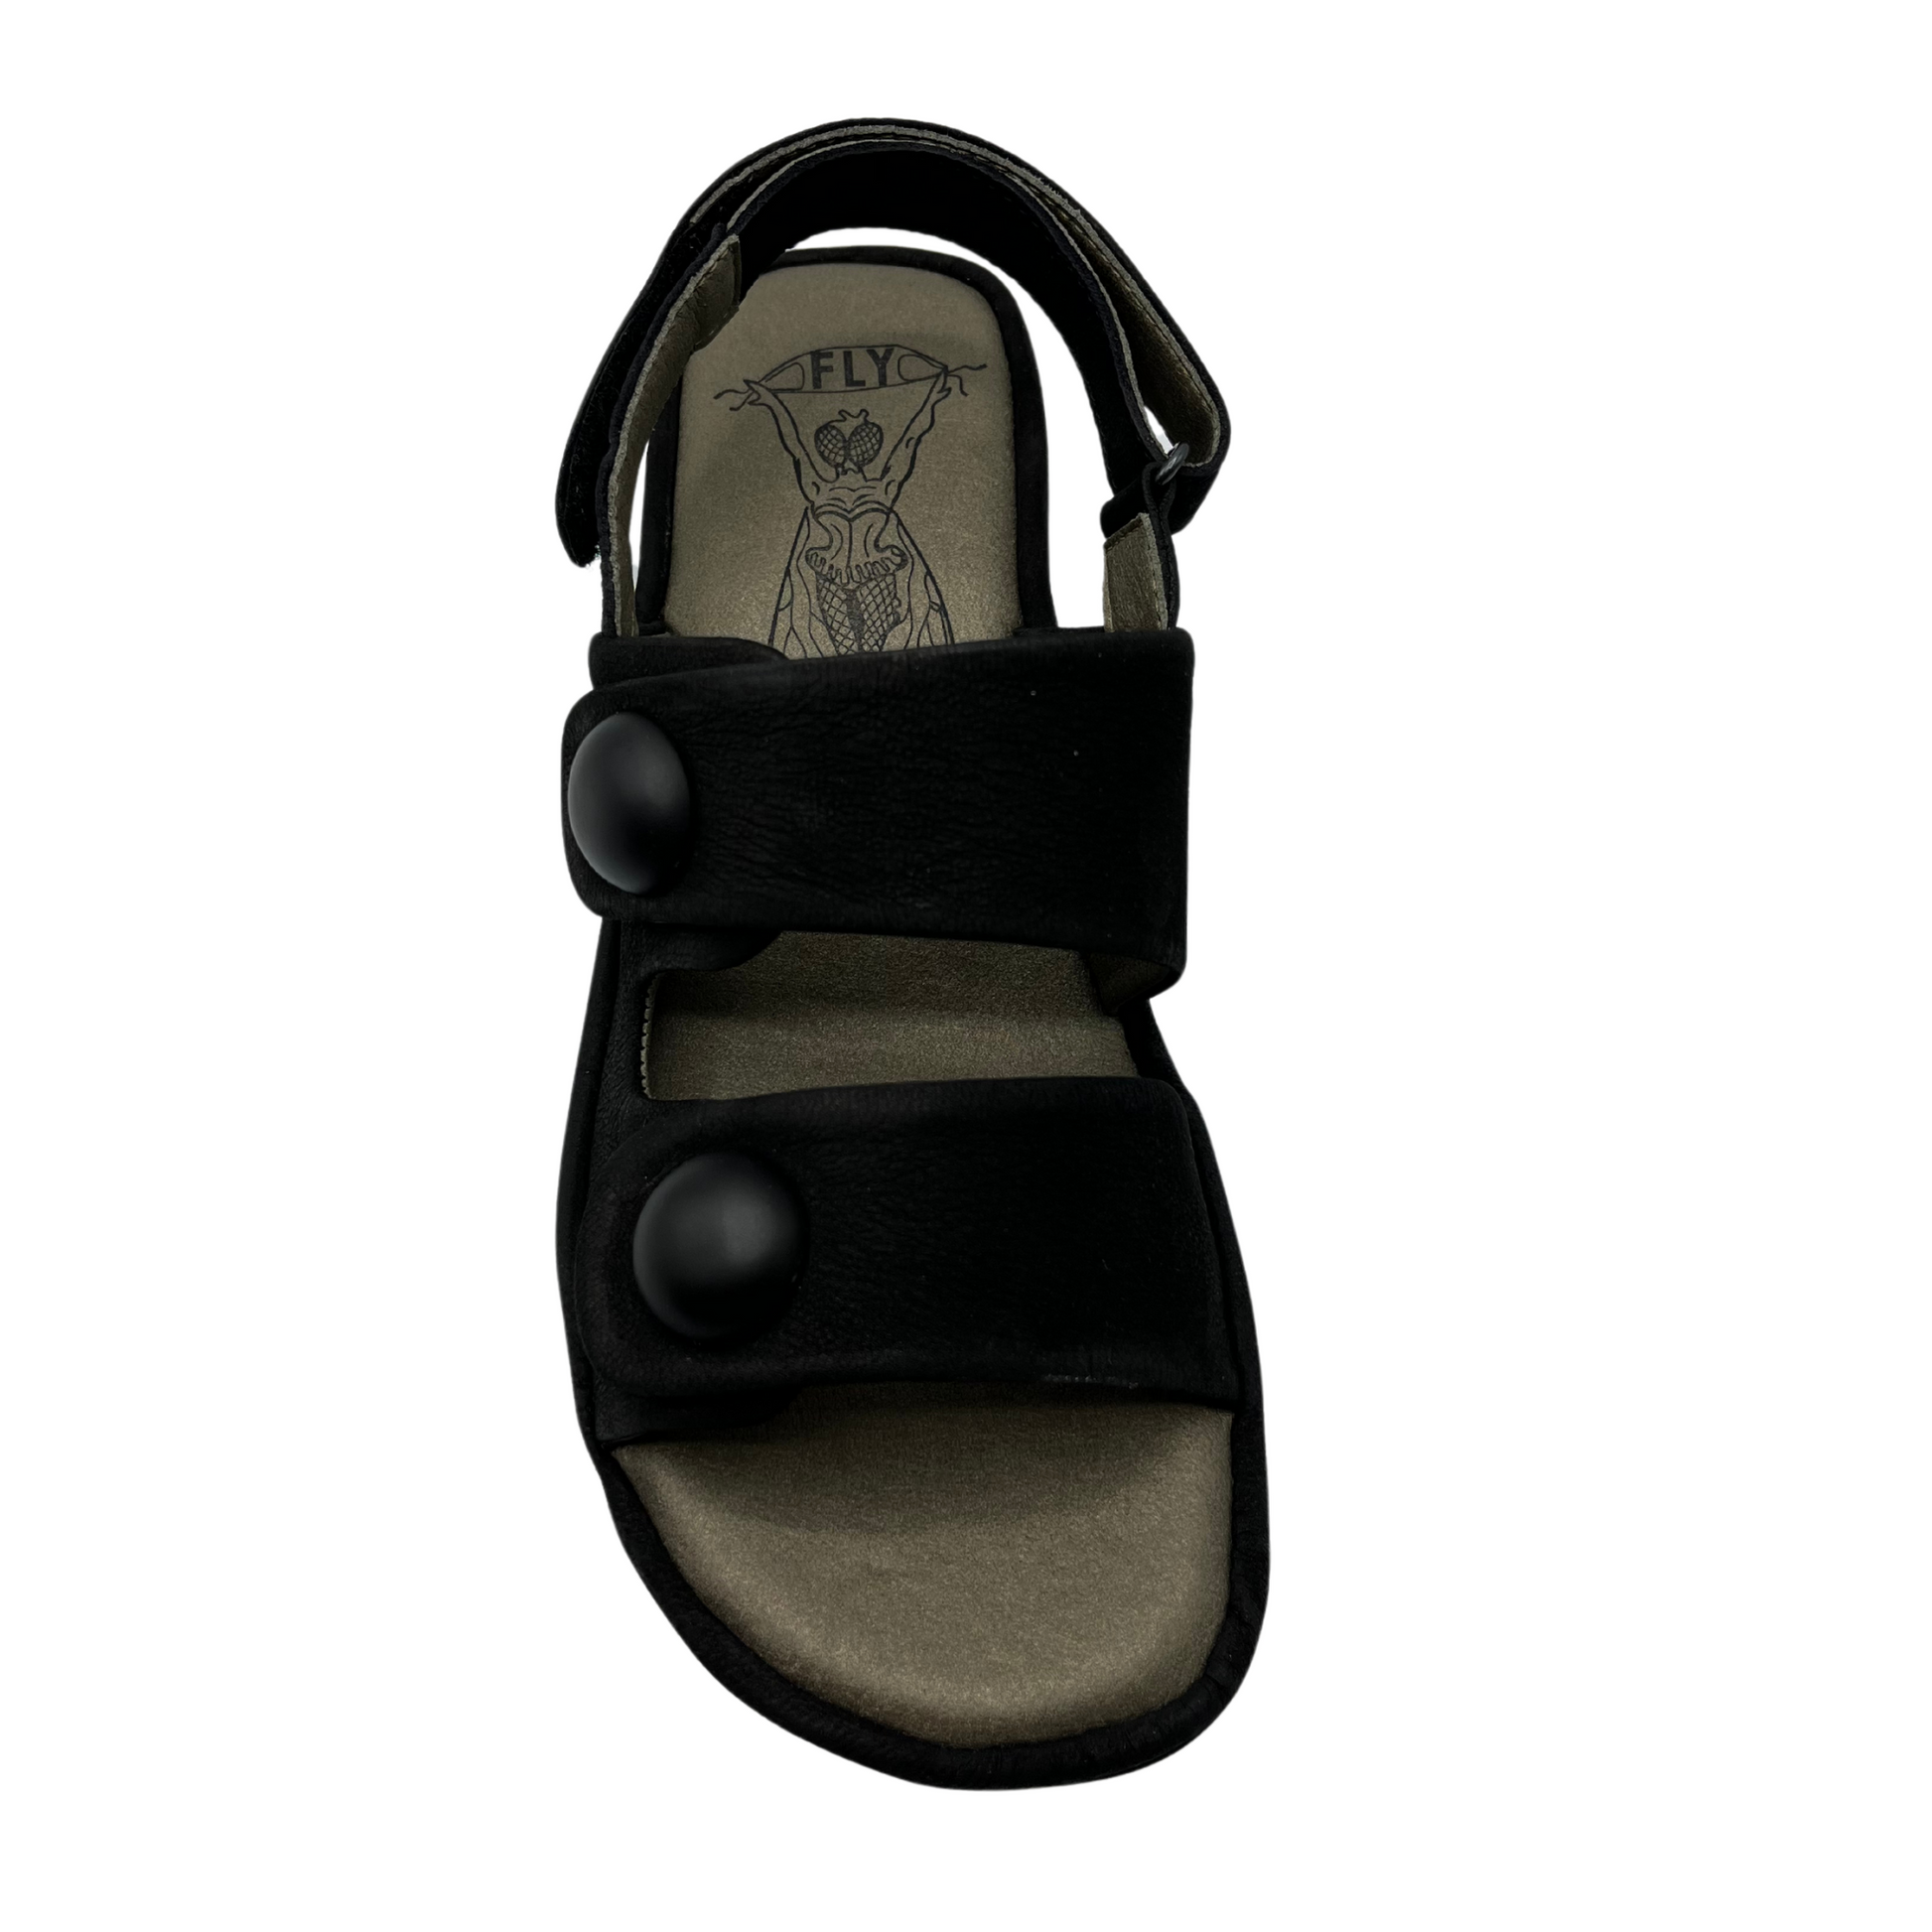 Top facing view of black leather sandal with block heel, velcro slingback strap and double straps with large buttons